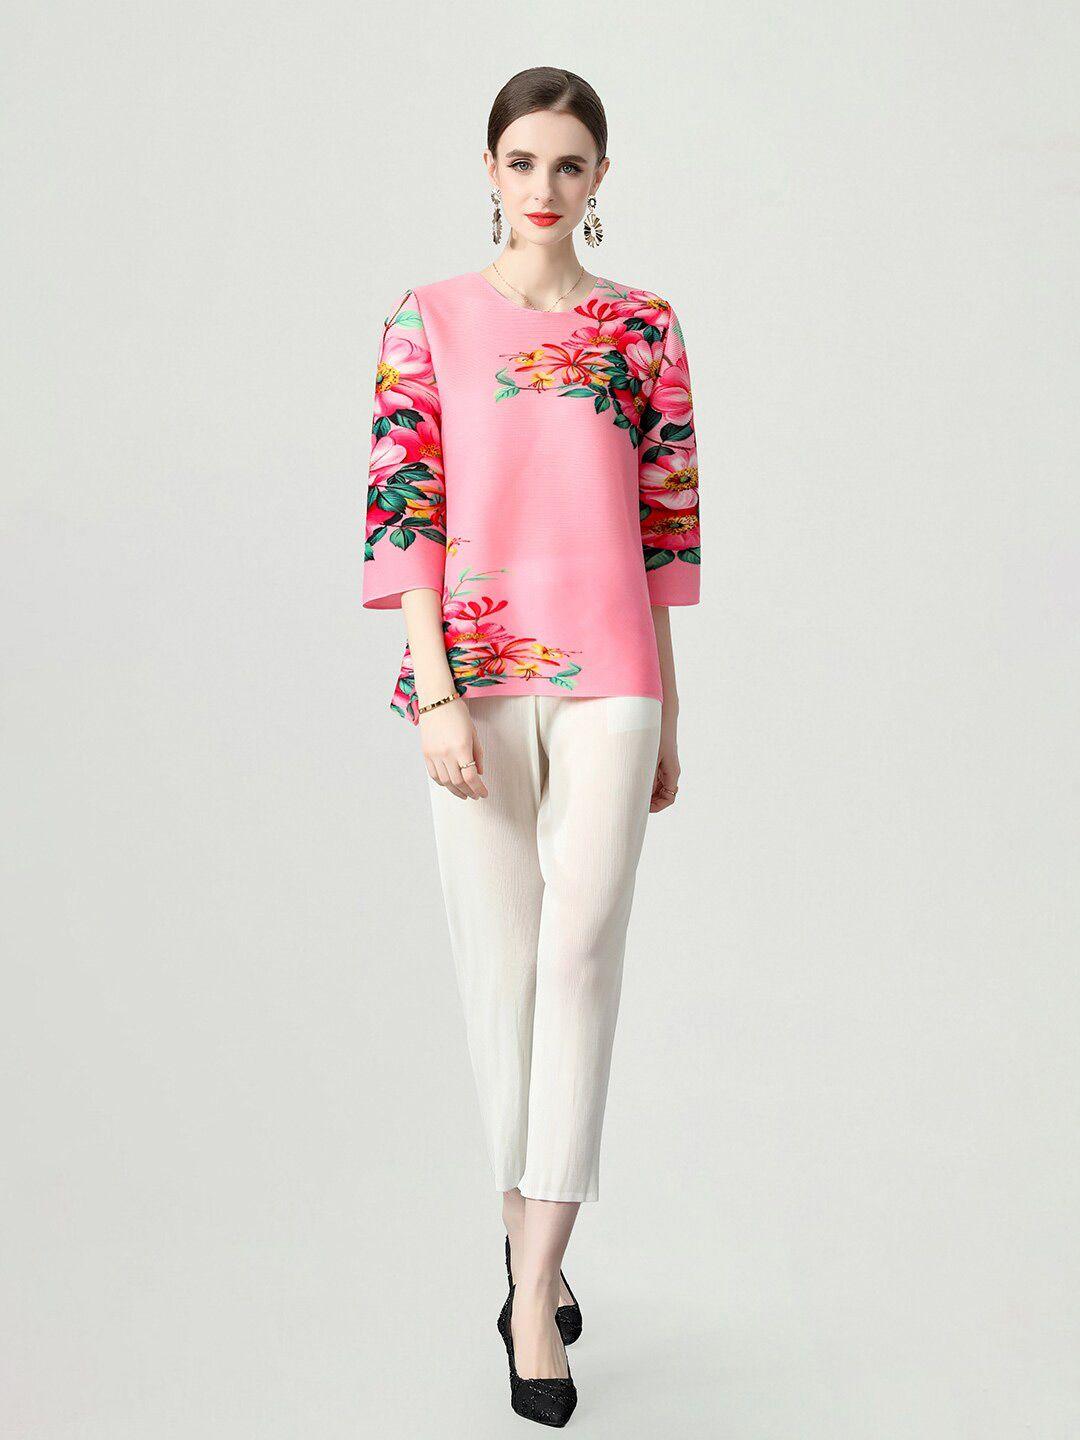 jc collection floral printed top & cropped trouser